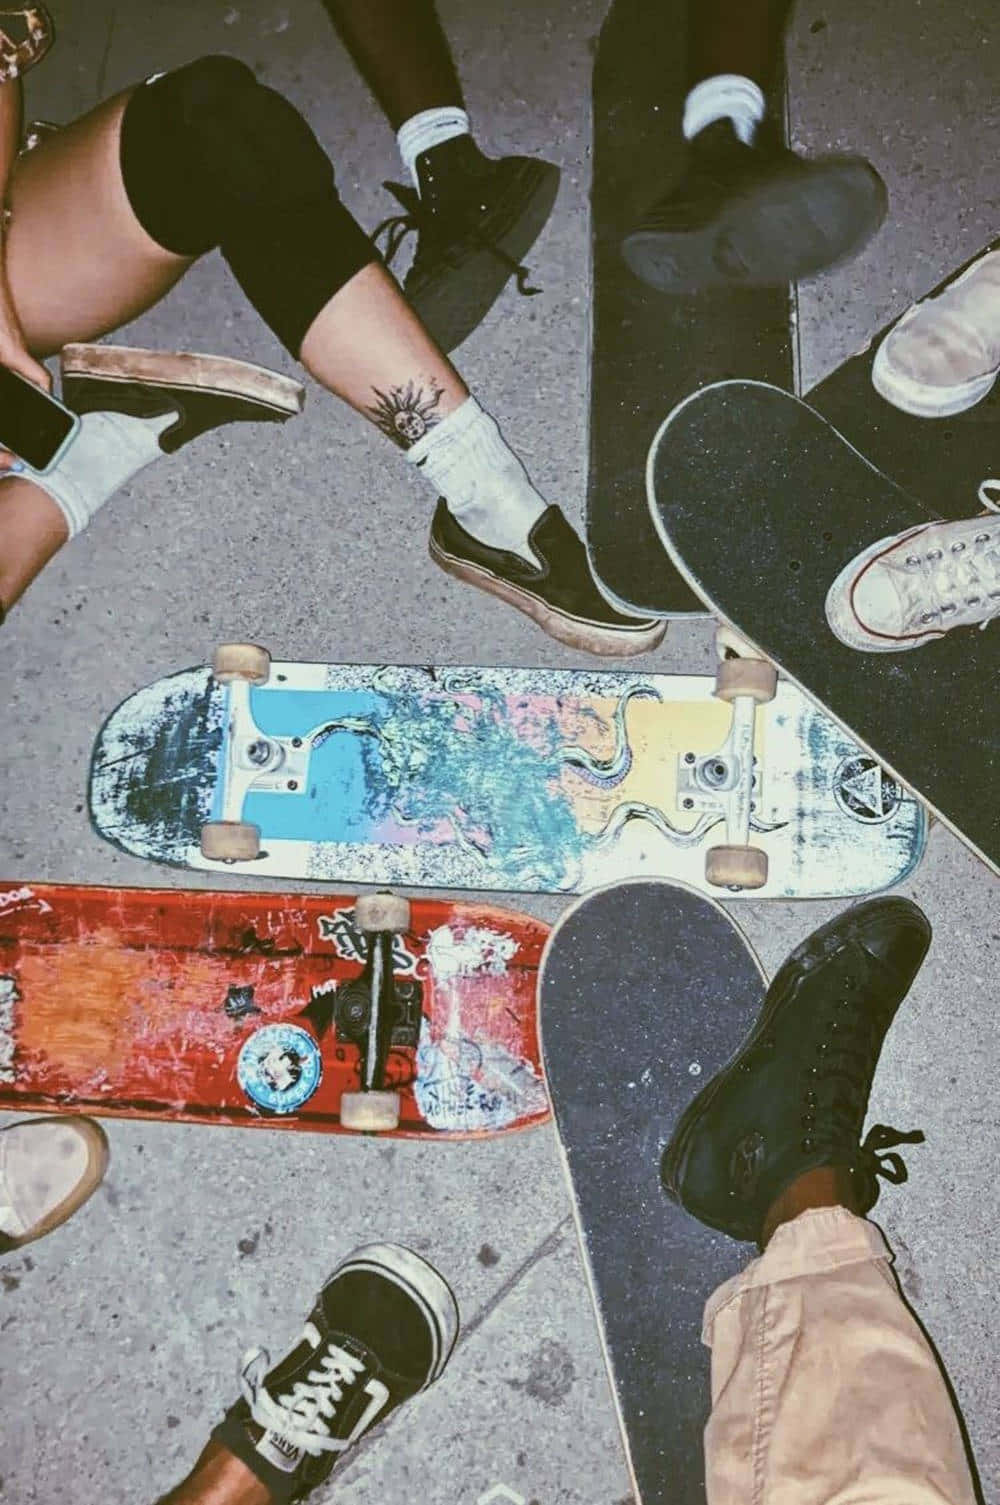 A Group Of People Sitting On Skateboards Wallpaper